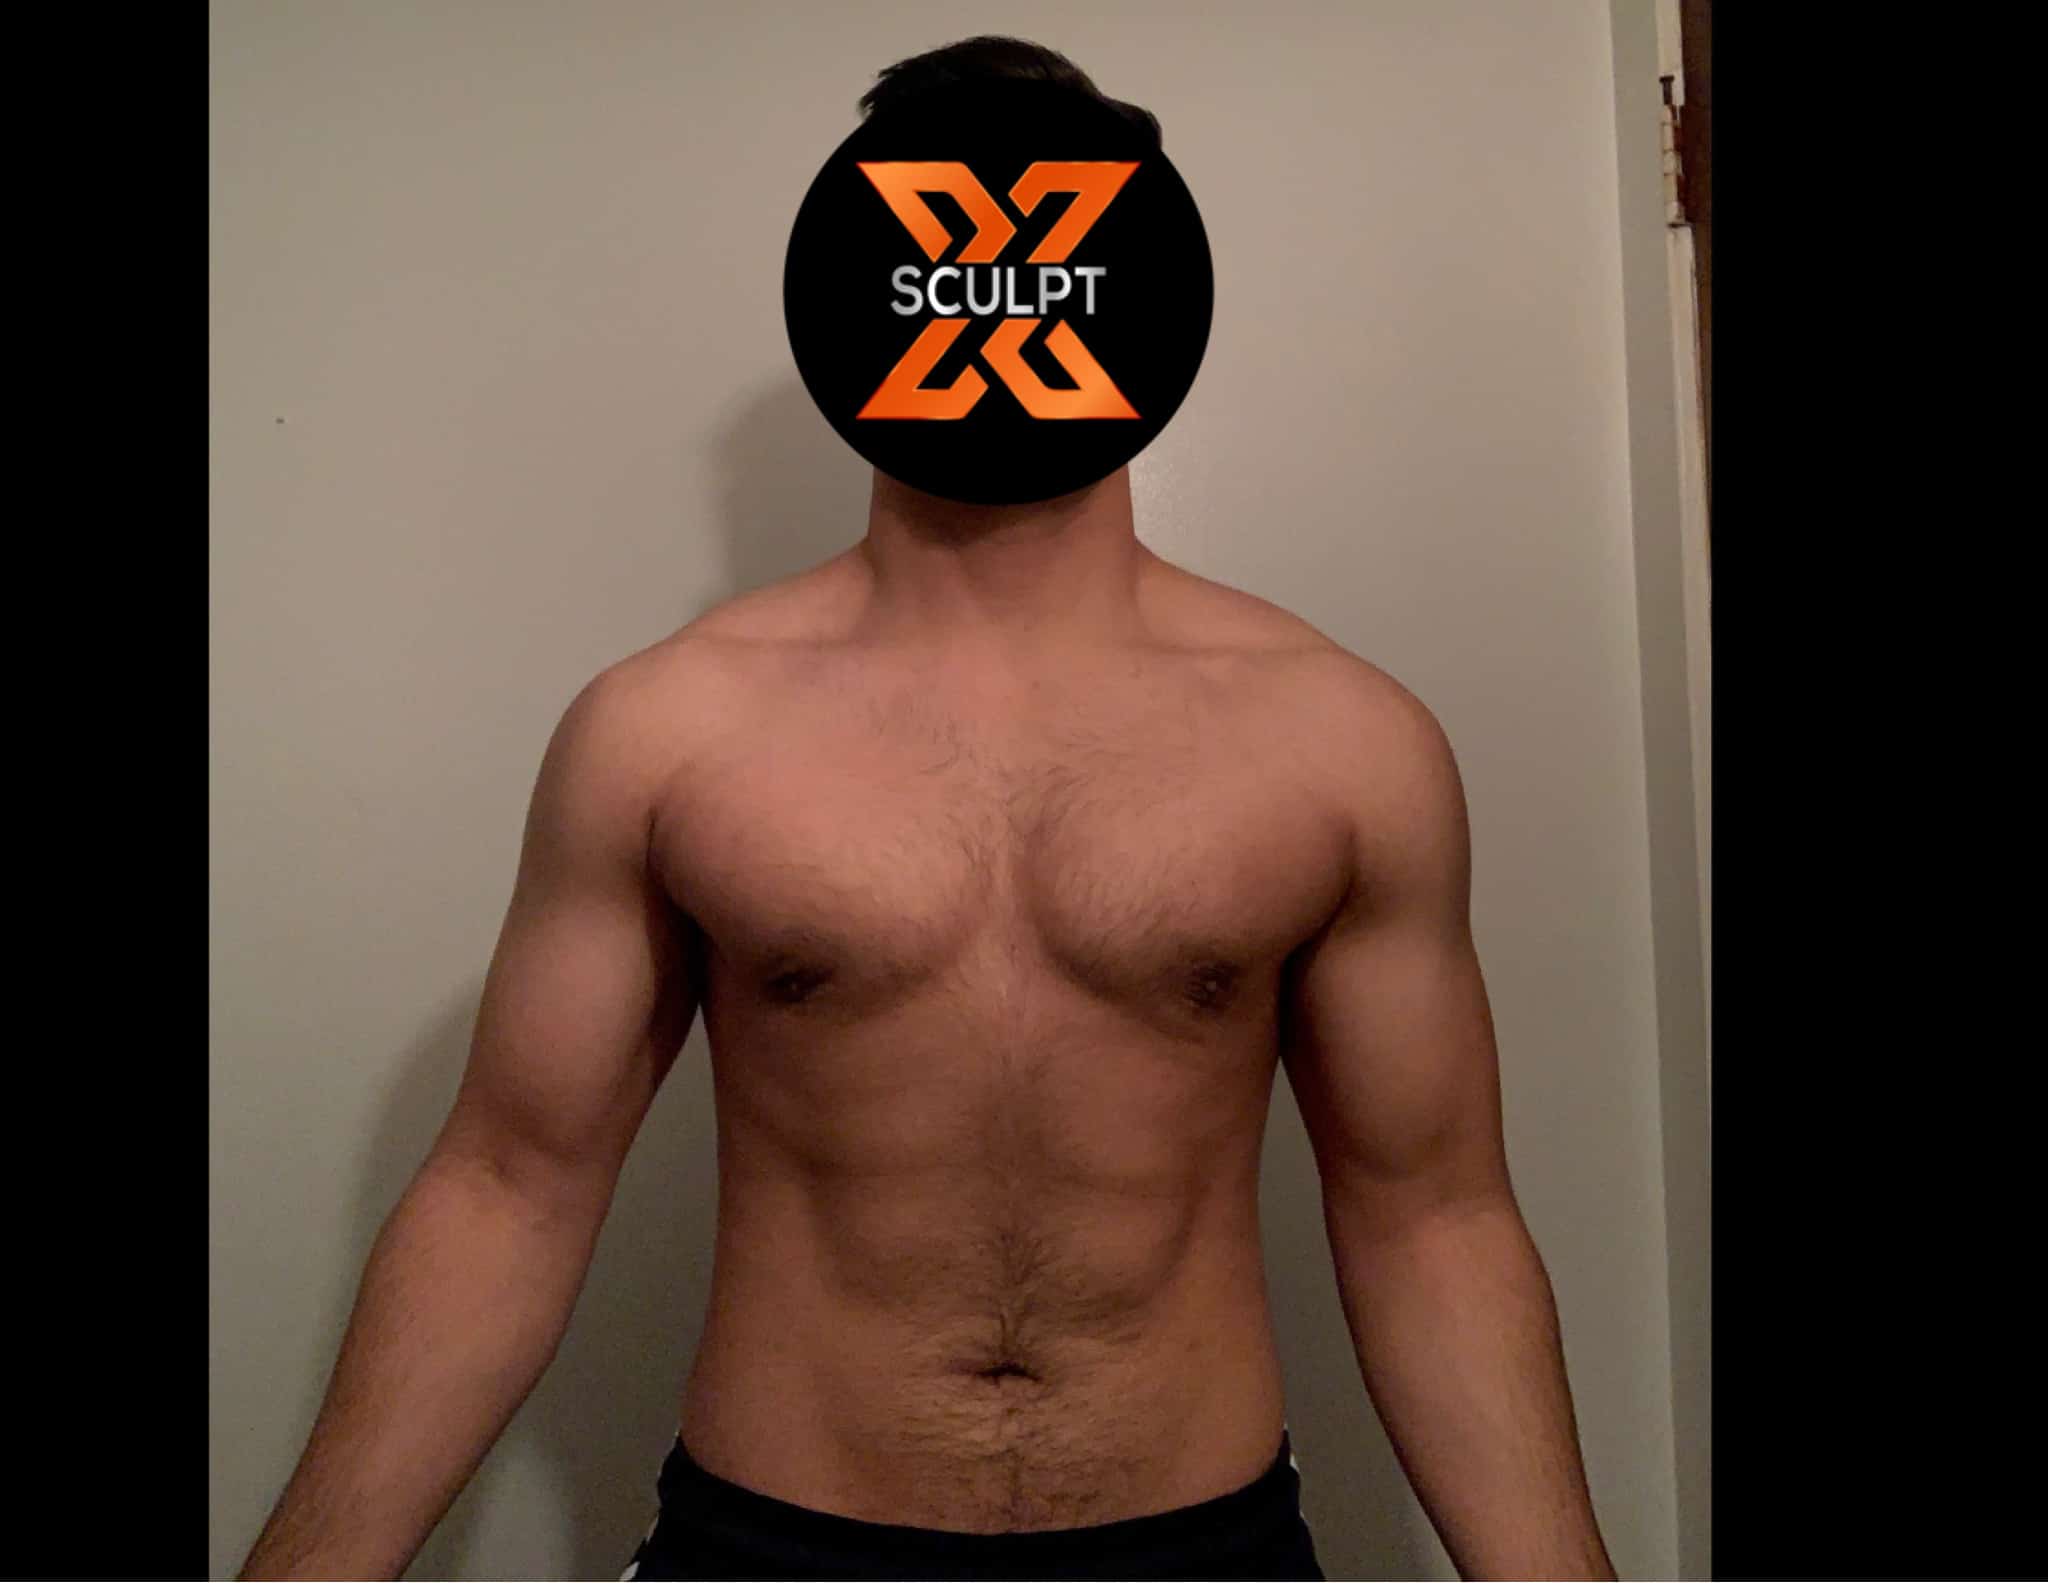 Xsculpt, “The best experience from start to finish”